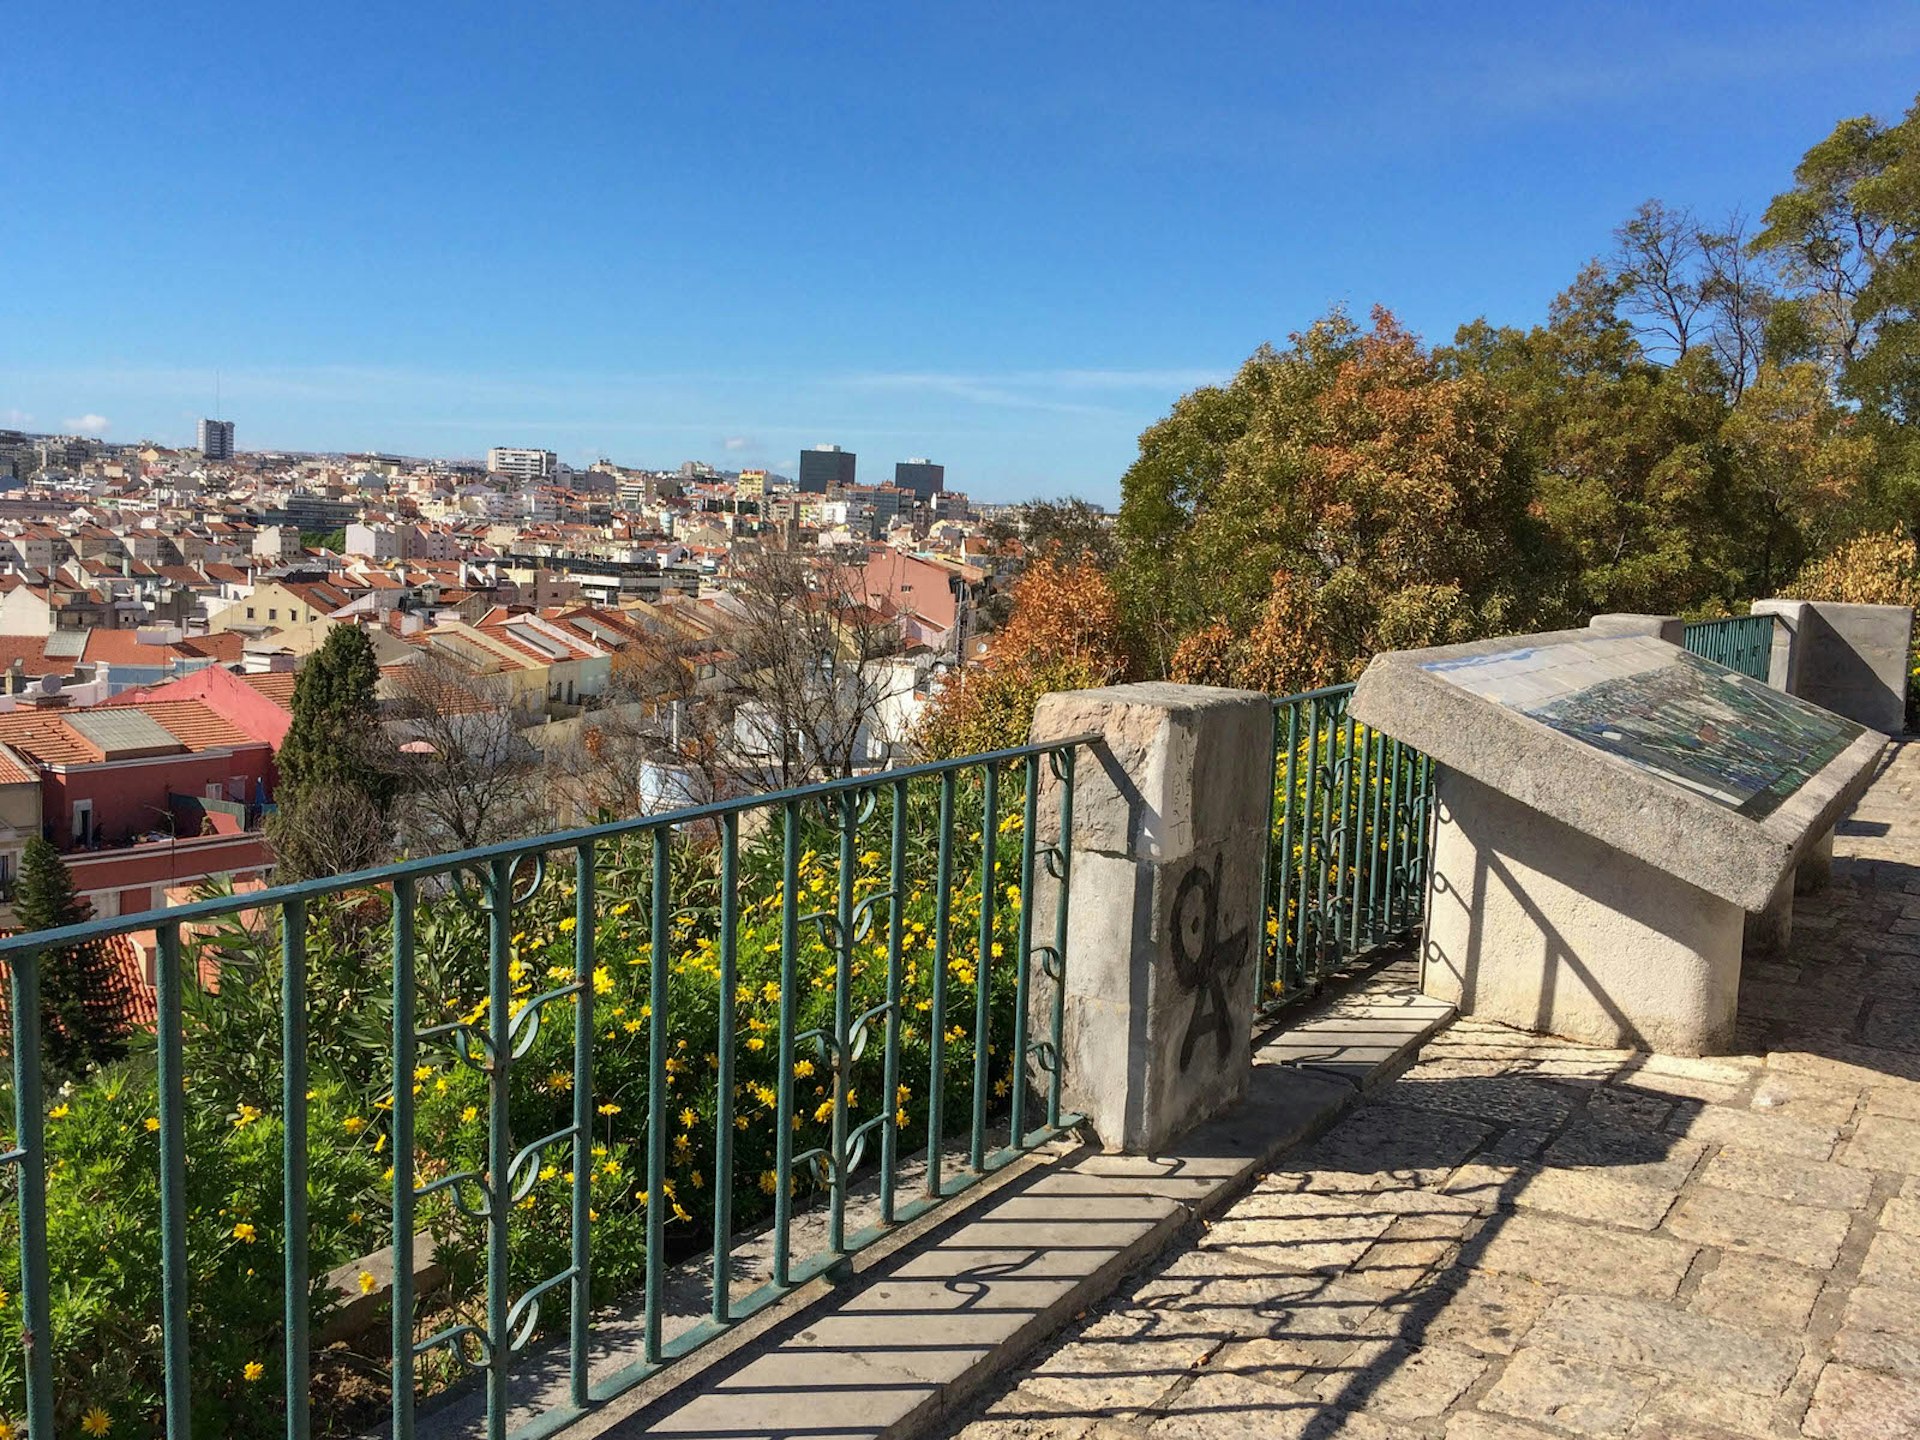 Trees, flowers and a view at Miradouro do Monte Agudo